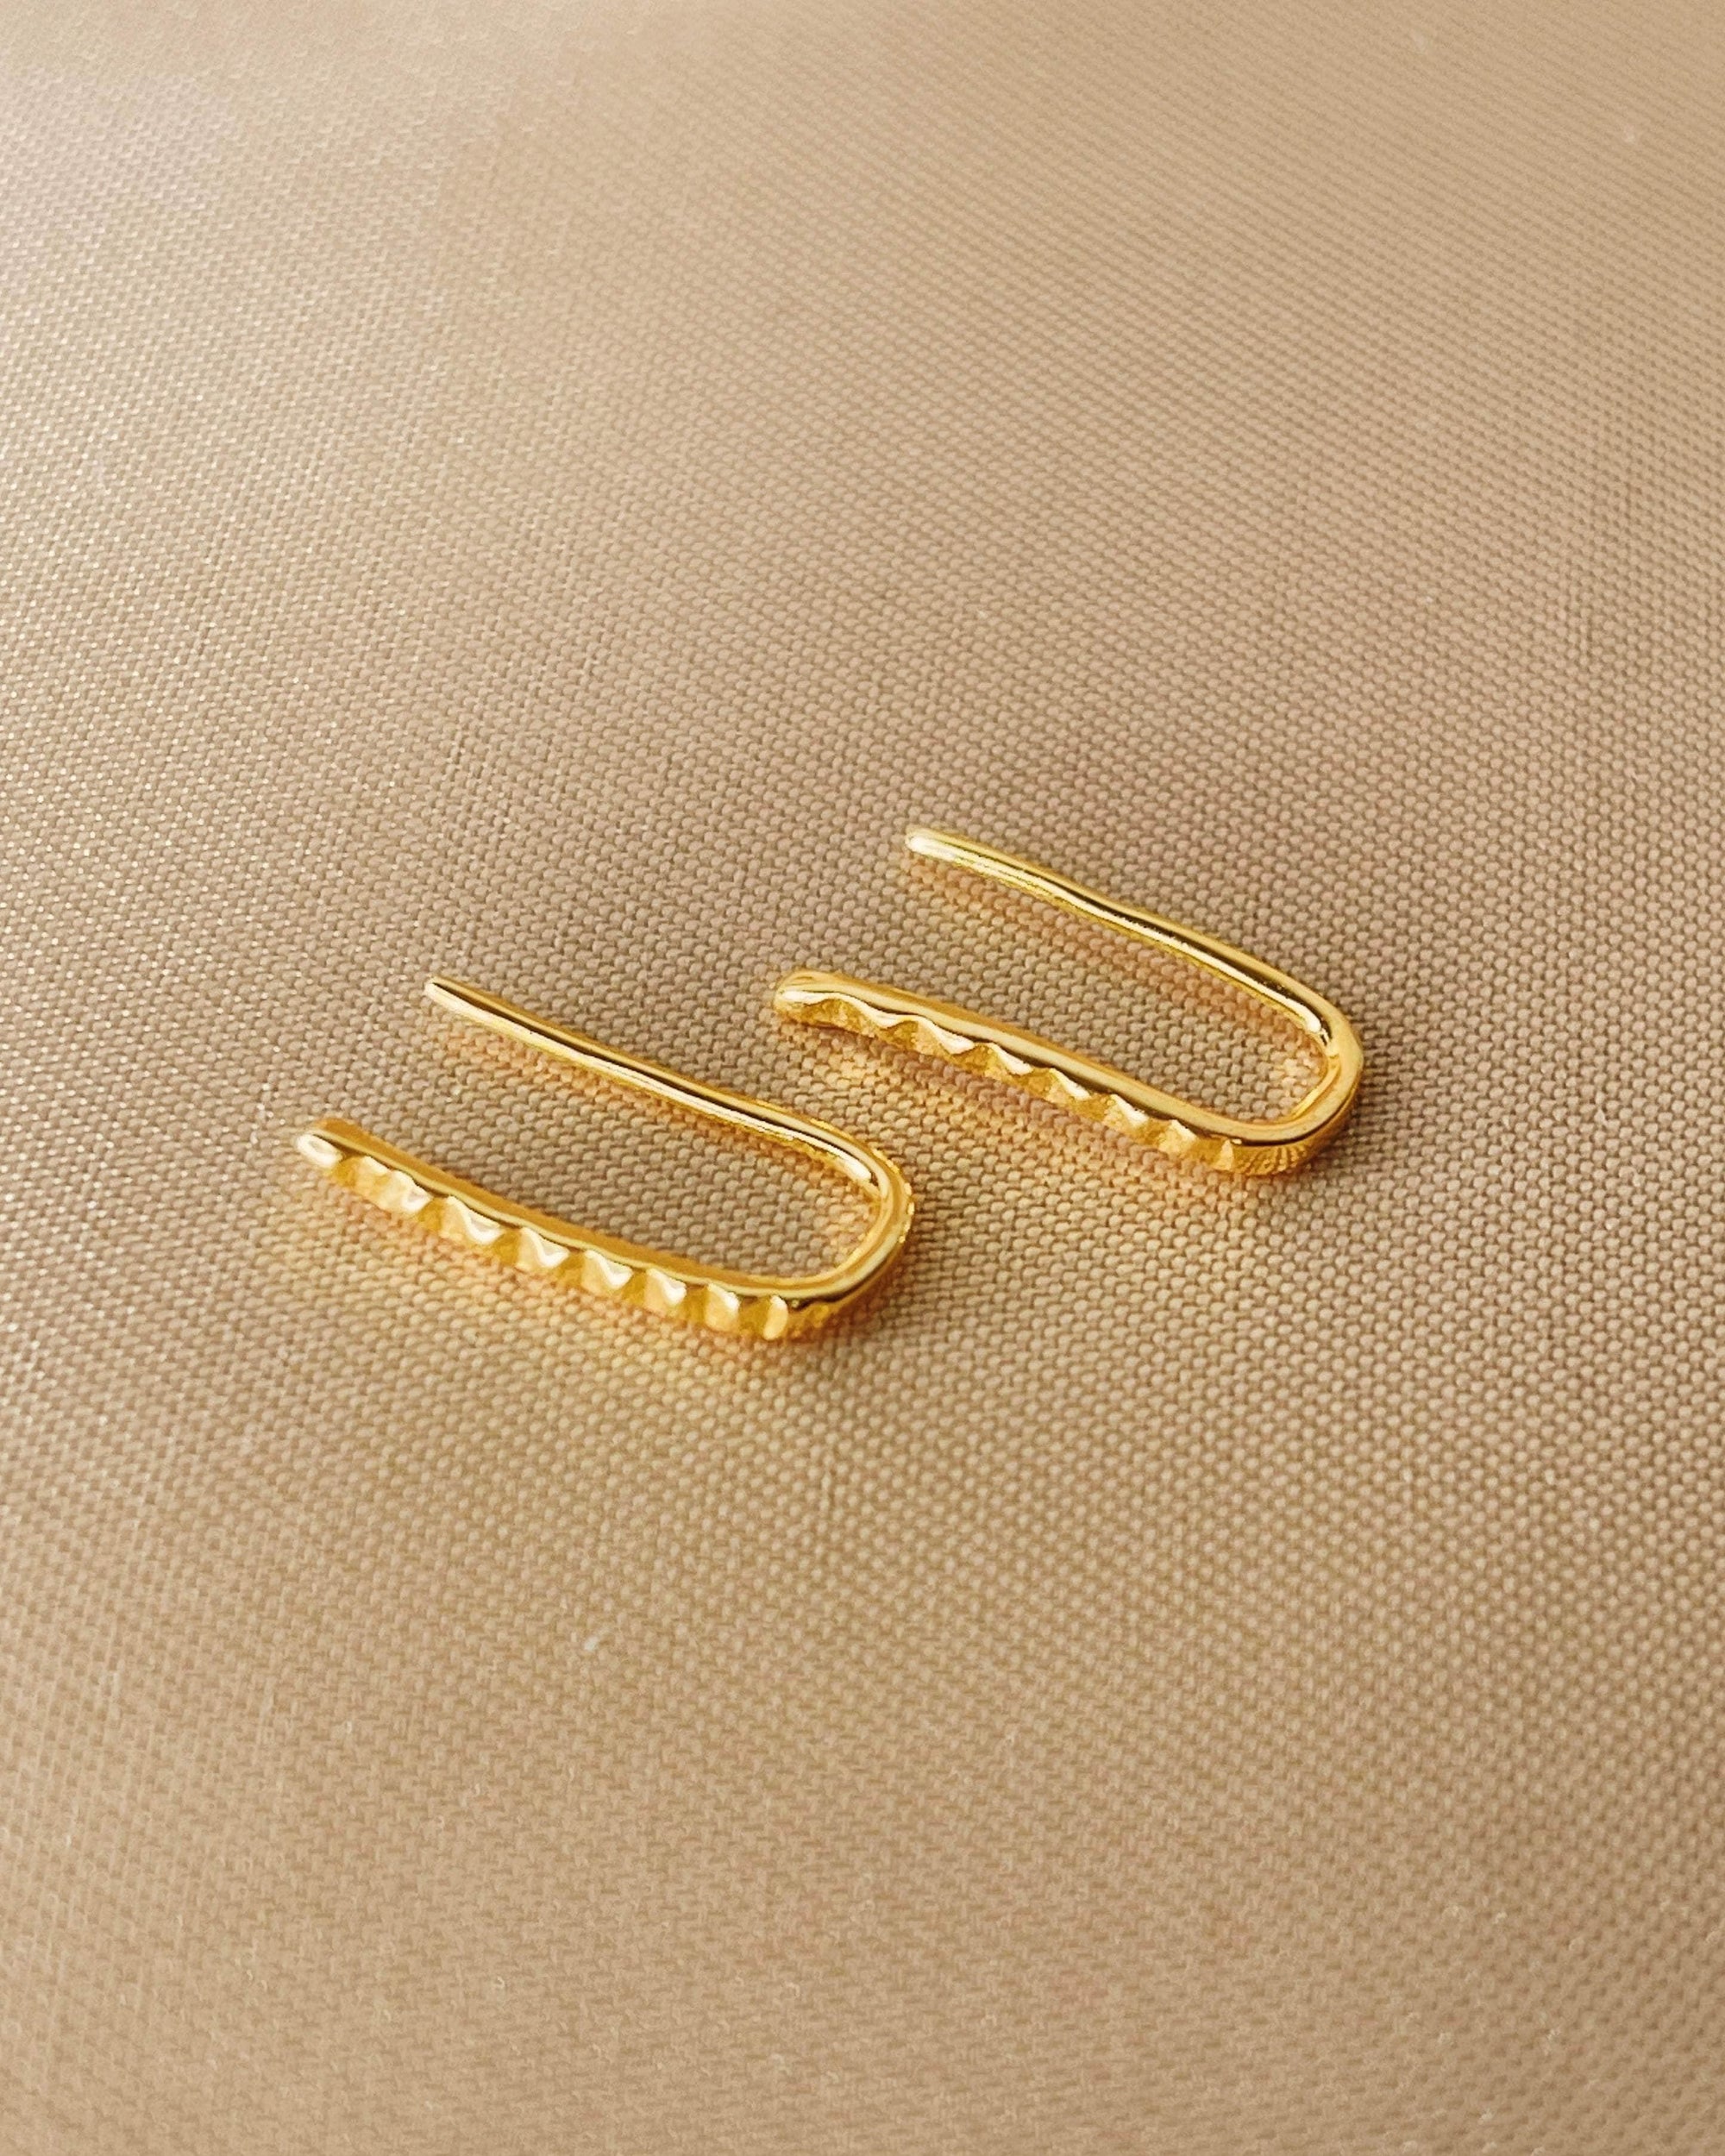 So Dainty Co. Climbers Annabelle Gold Climber Earrings Gold Plated 925 Sterling Silver Jewelry